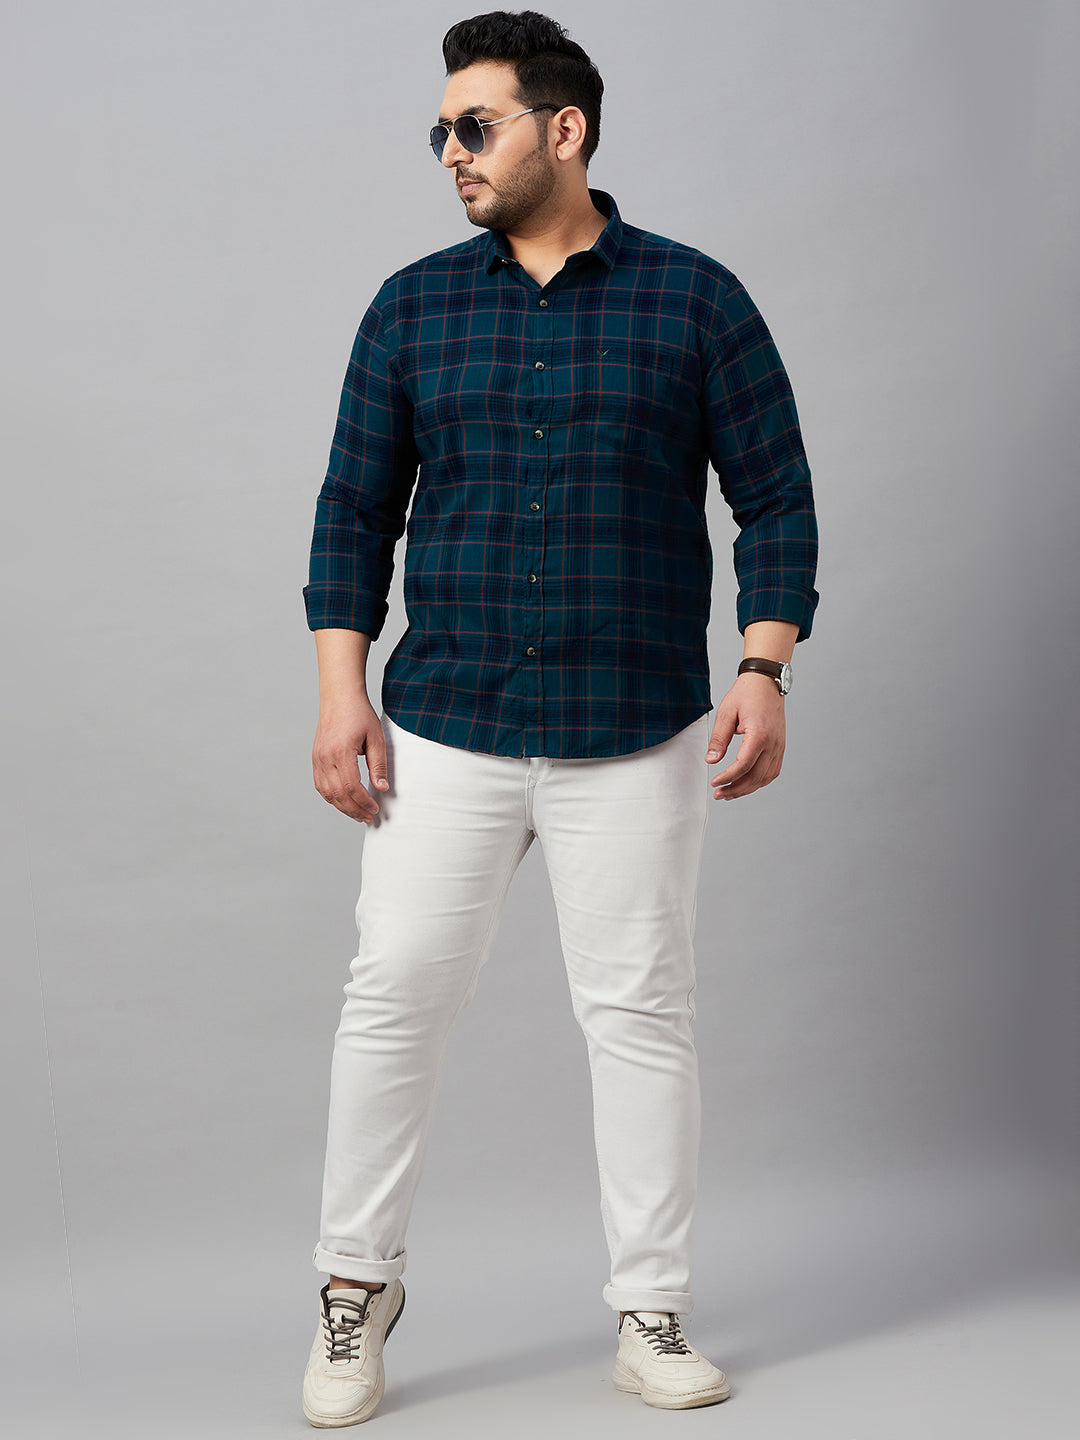 Men Checked Teal Classic Shirt